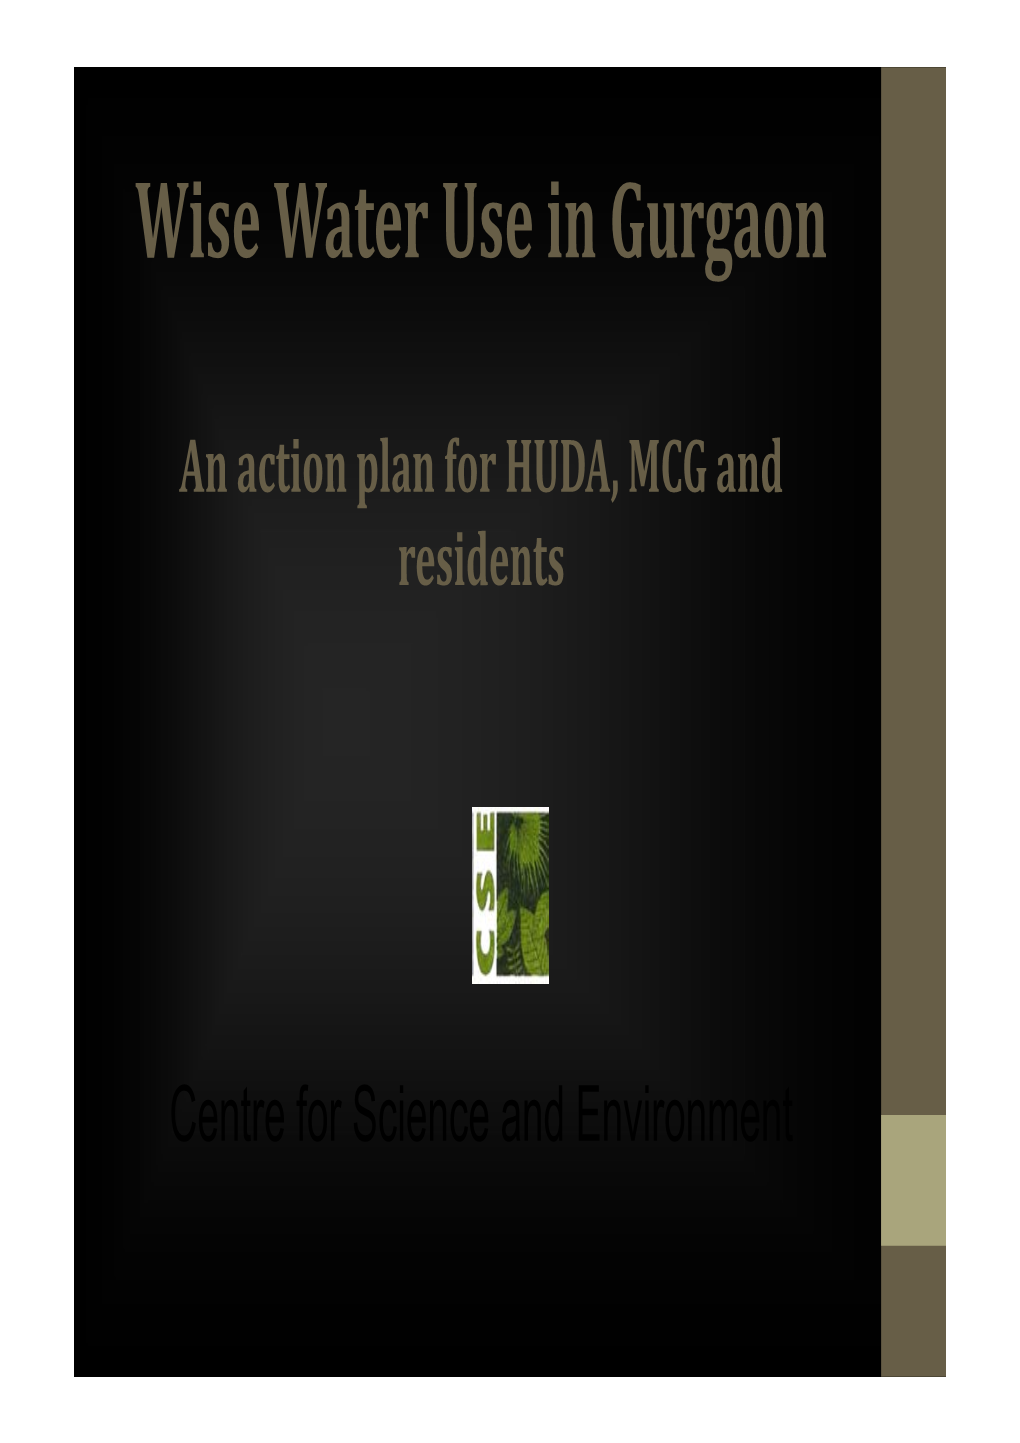 Wise Water Use in Gurgaon